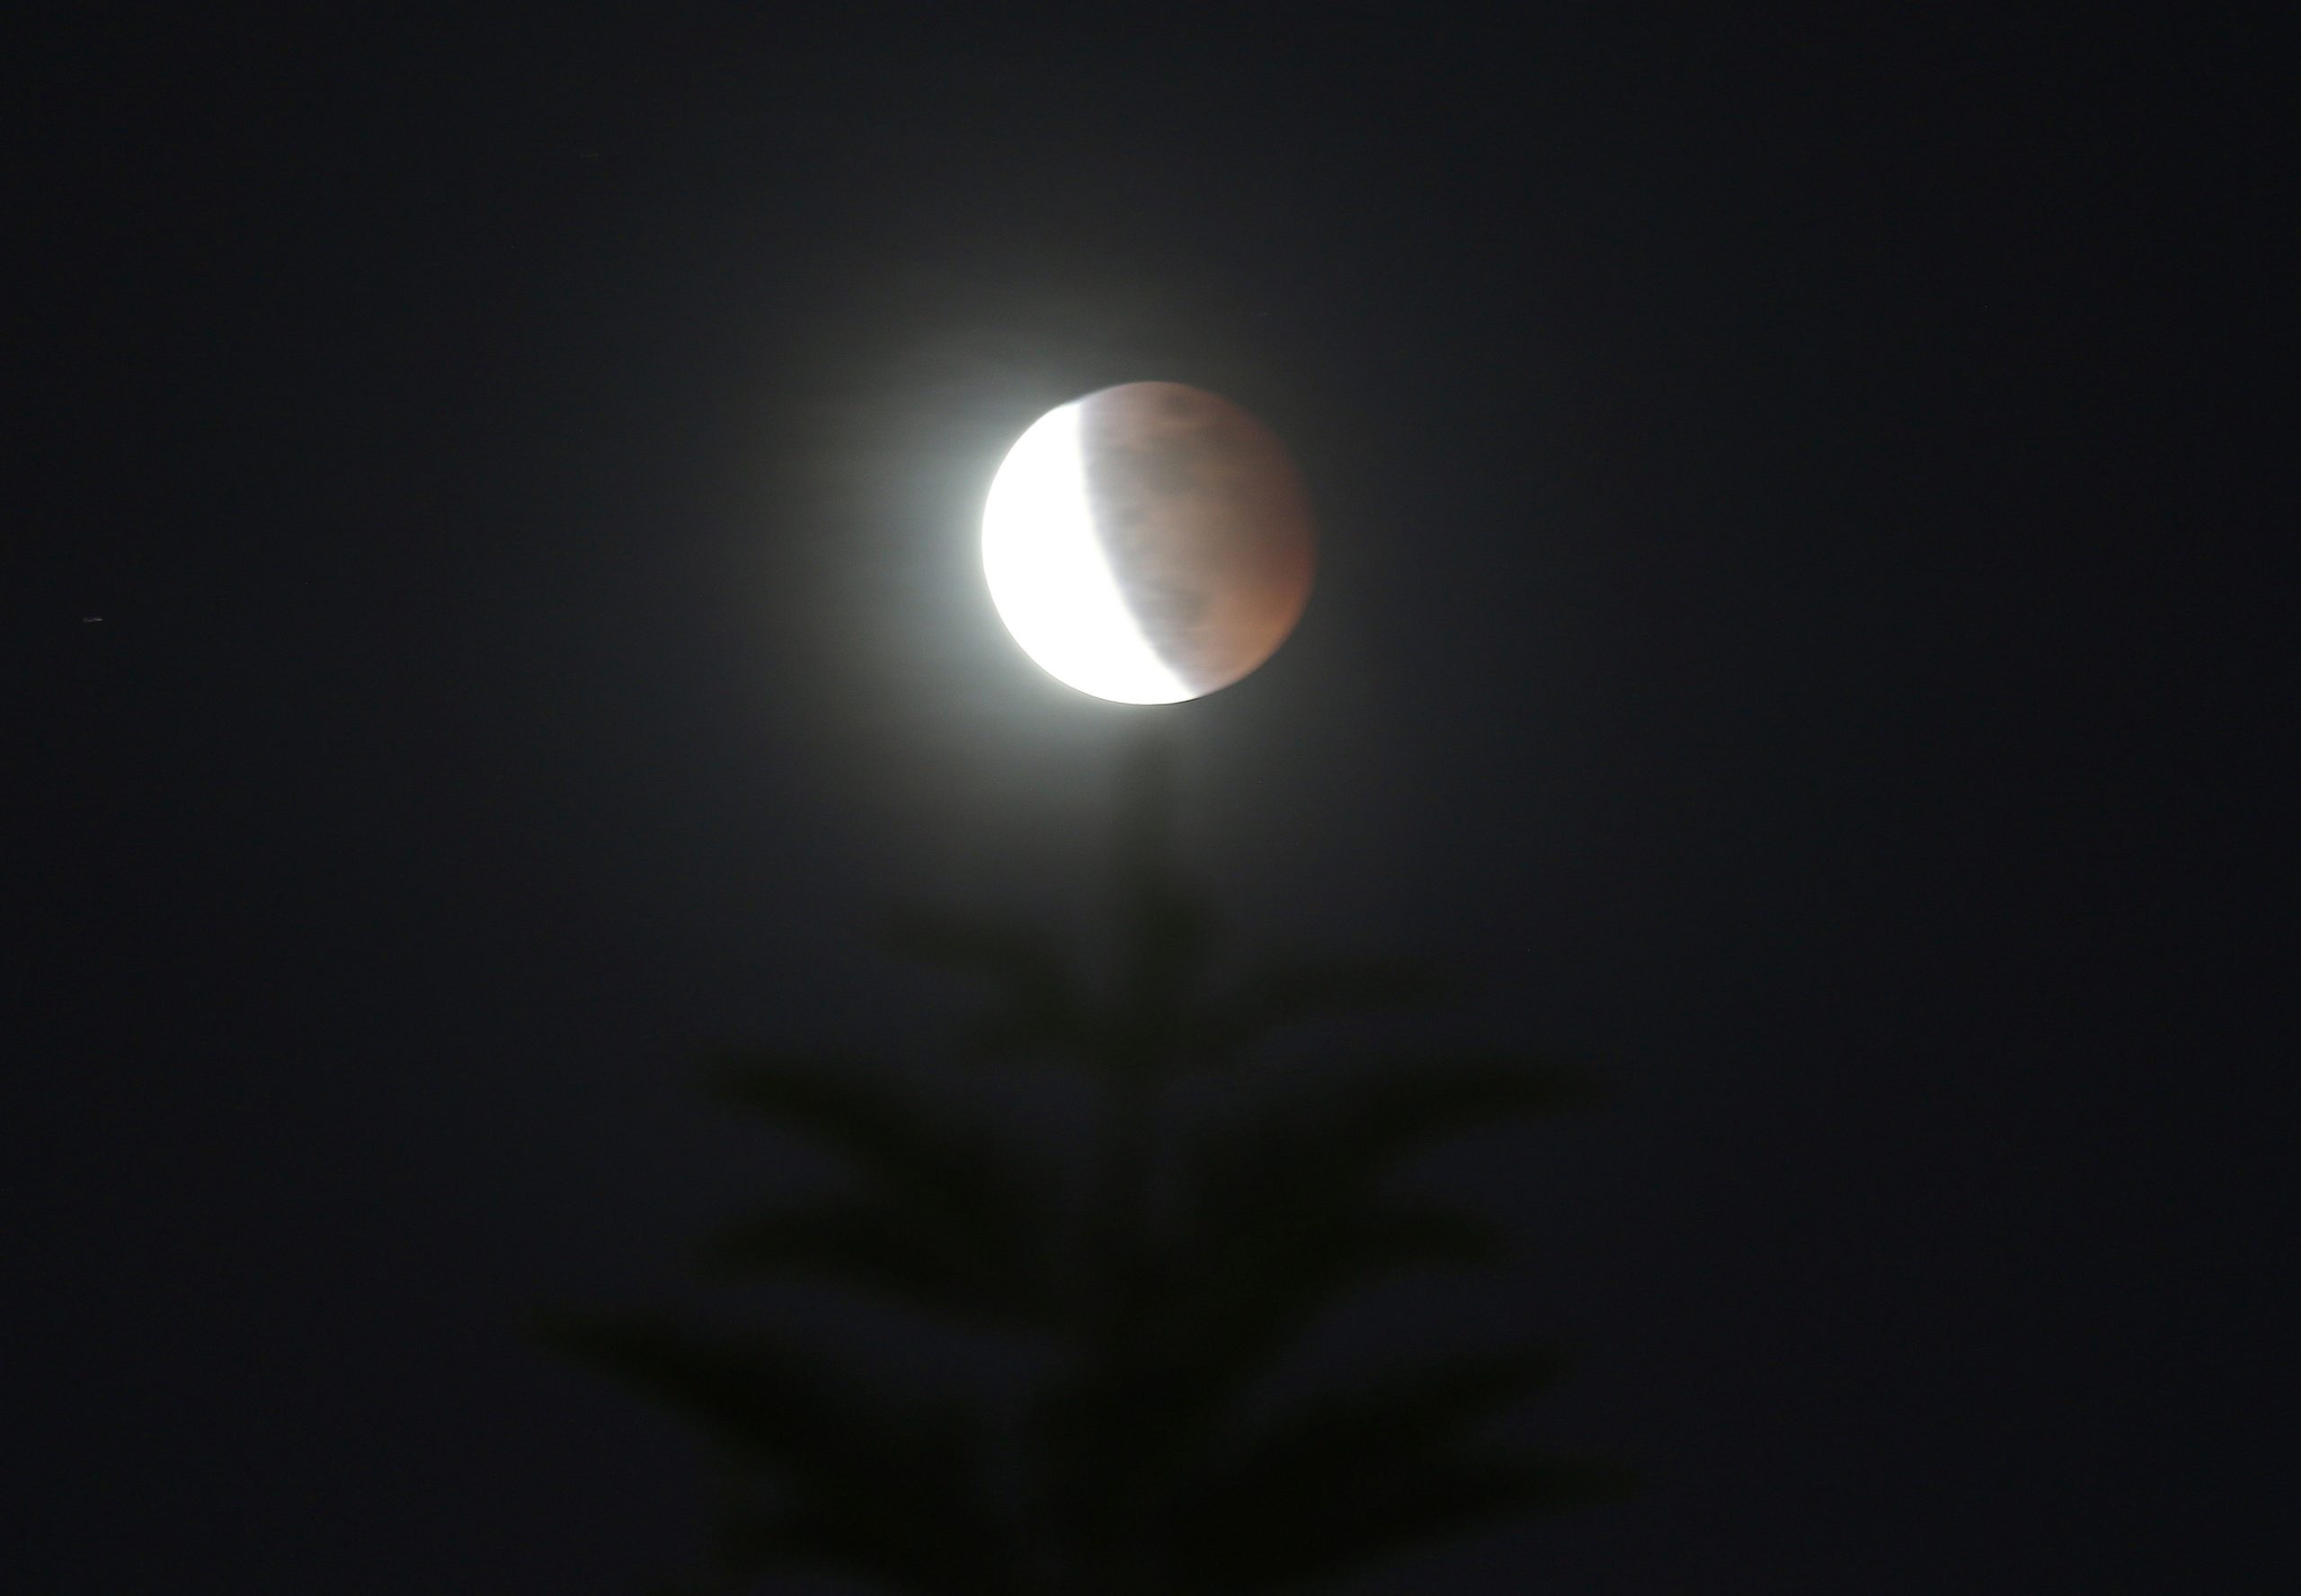 A full moon rises over a tree as a total lunar eclipse was taking place  on a cloudy day in Taipei, Taiwan, Wednesday, May 25, 2021. (Photo: Chiang Ying-ying, AP)